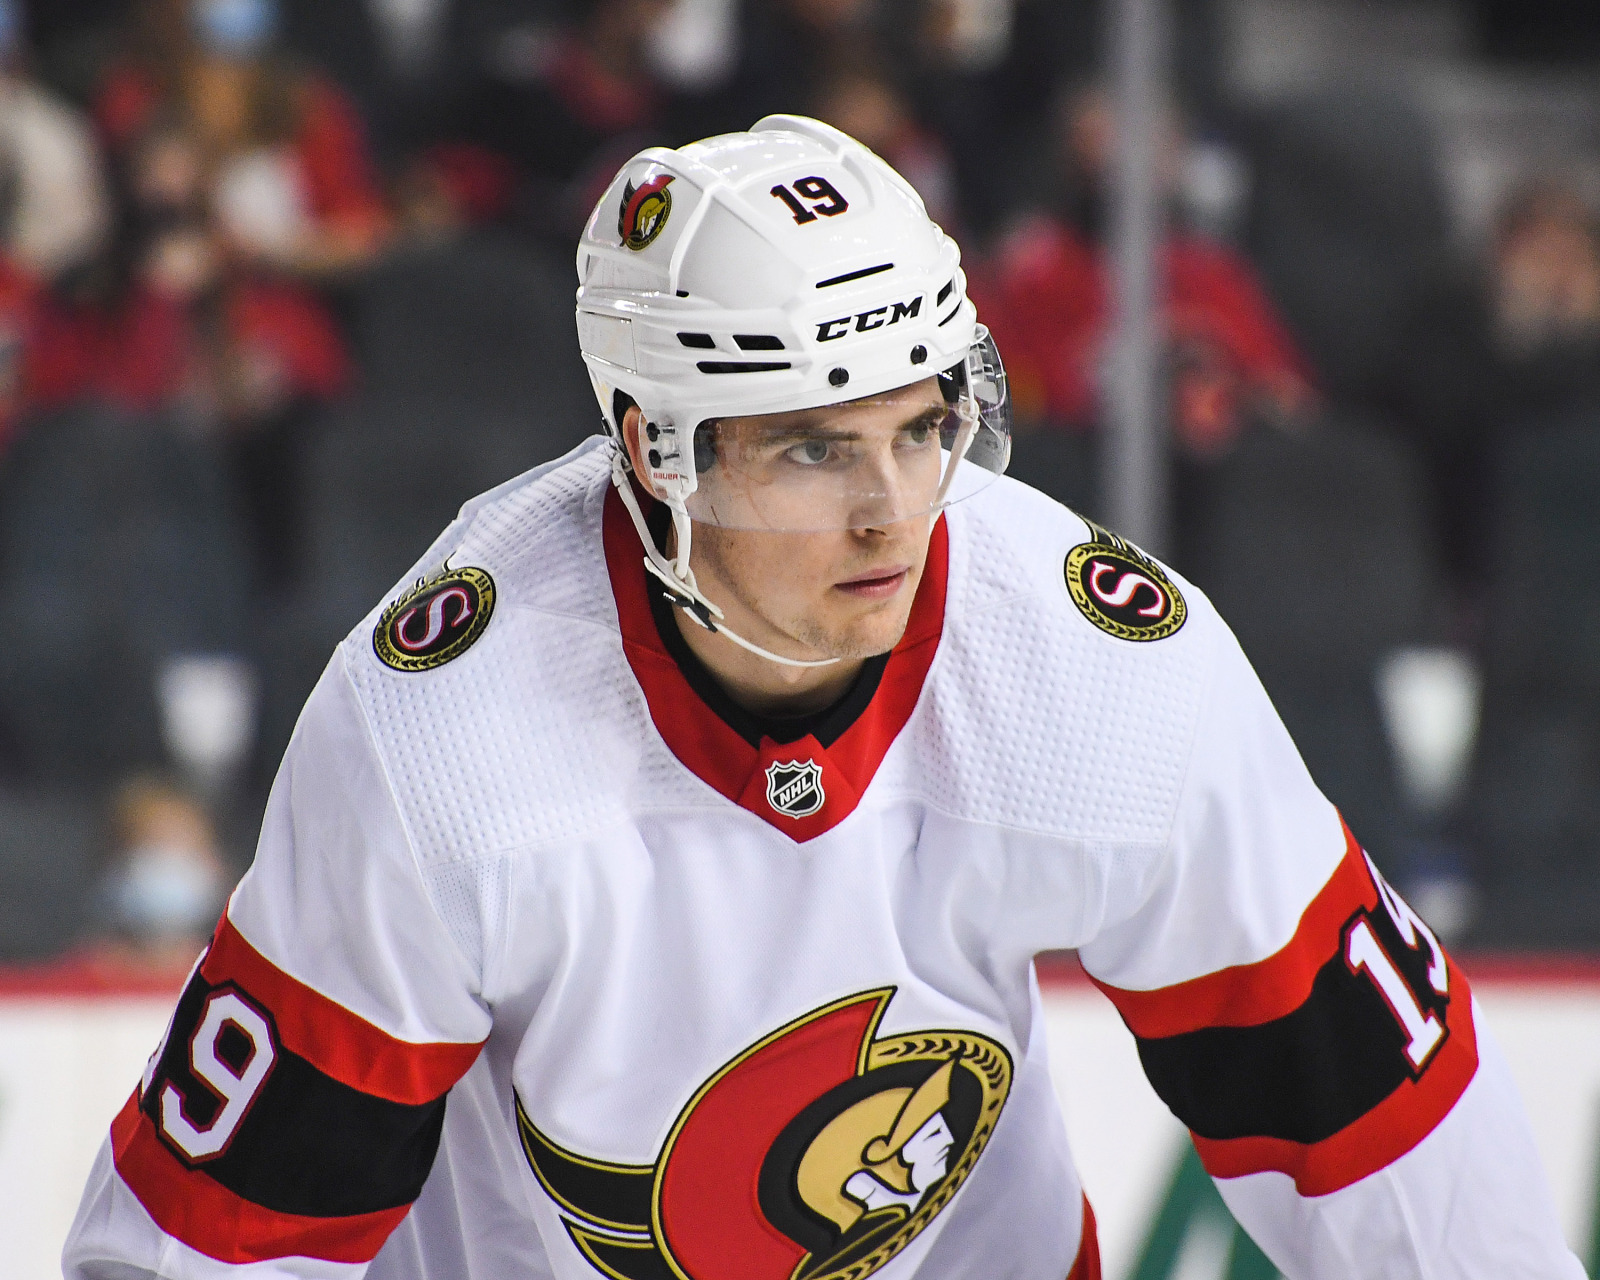 Senators' Batherson out at least 2 months with ankle sprain